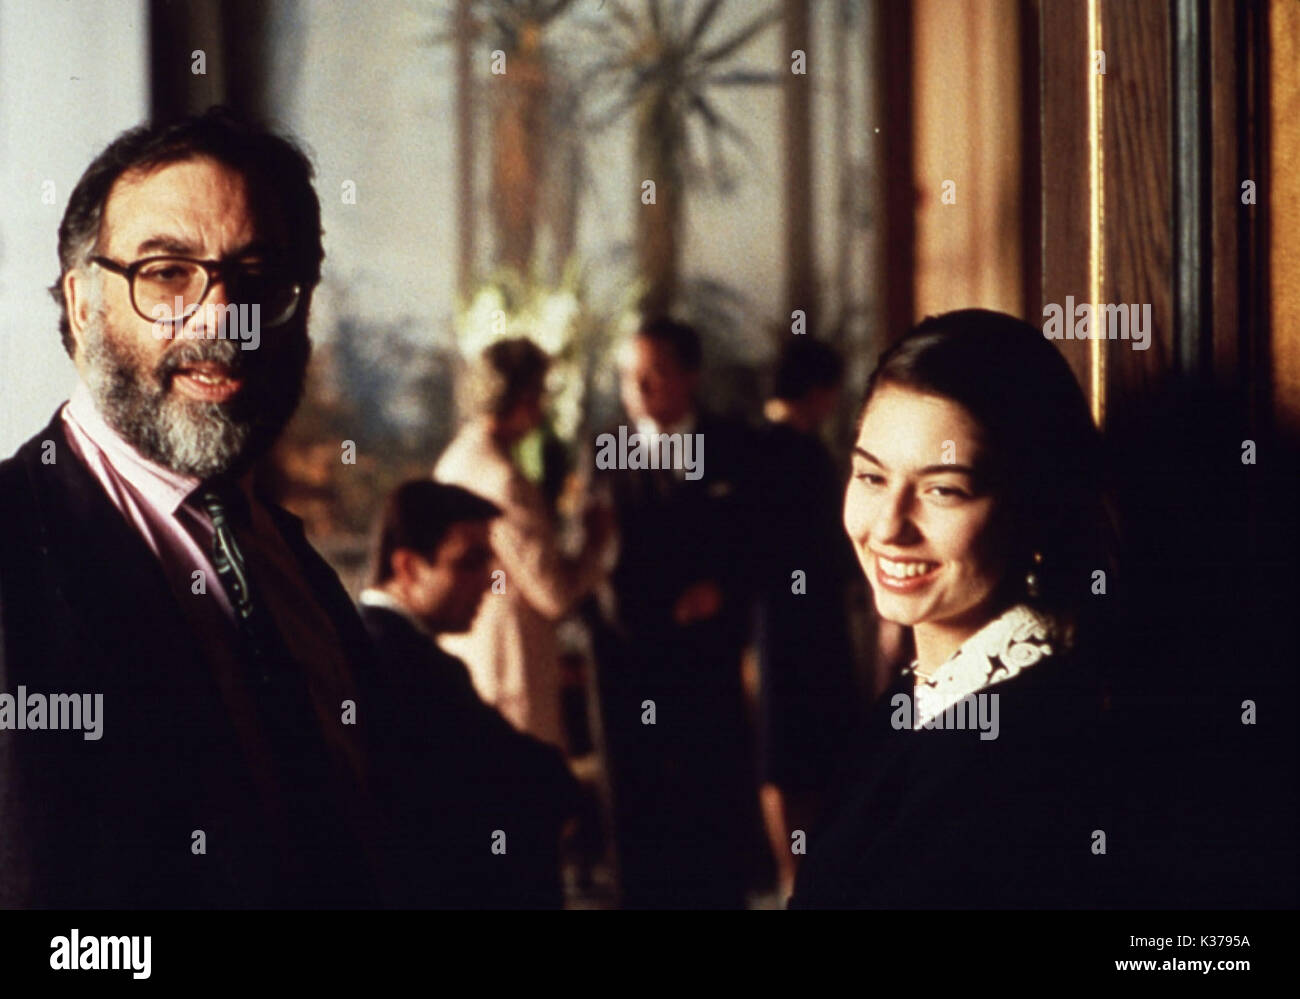 Sofia Coppolastars as Mary Corleone in paramount's The Godfather News  Photo - Getty Images